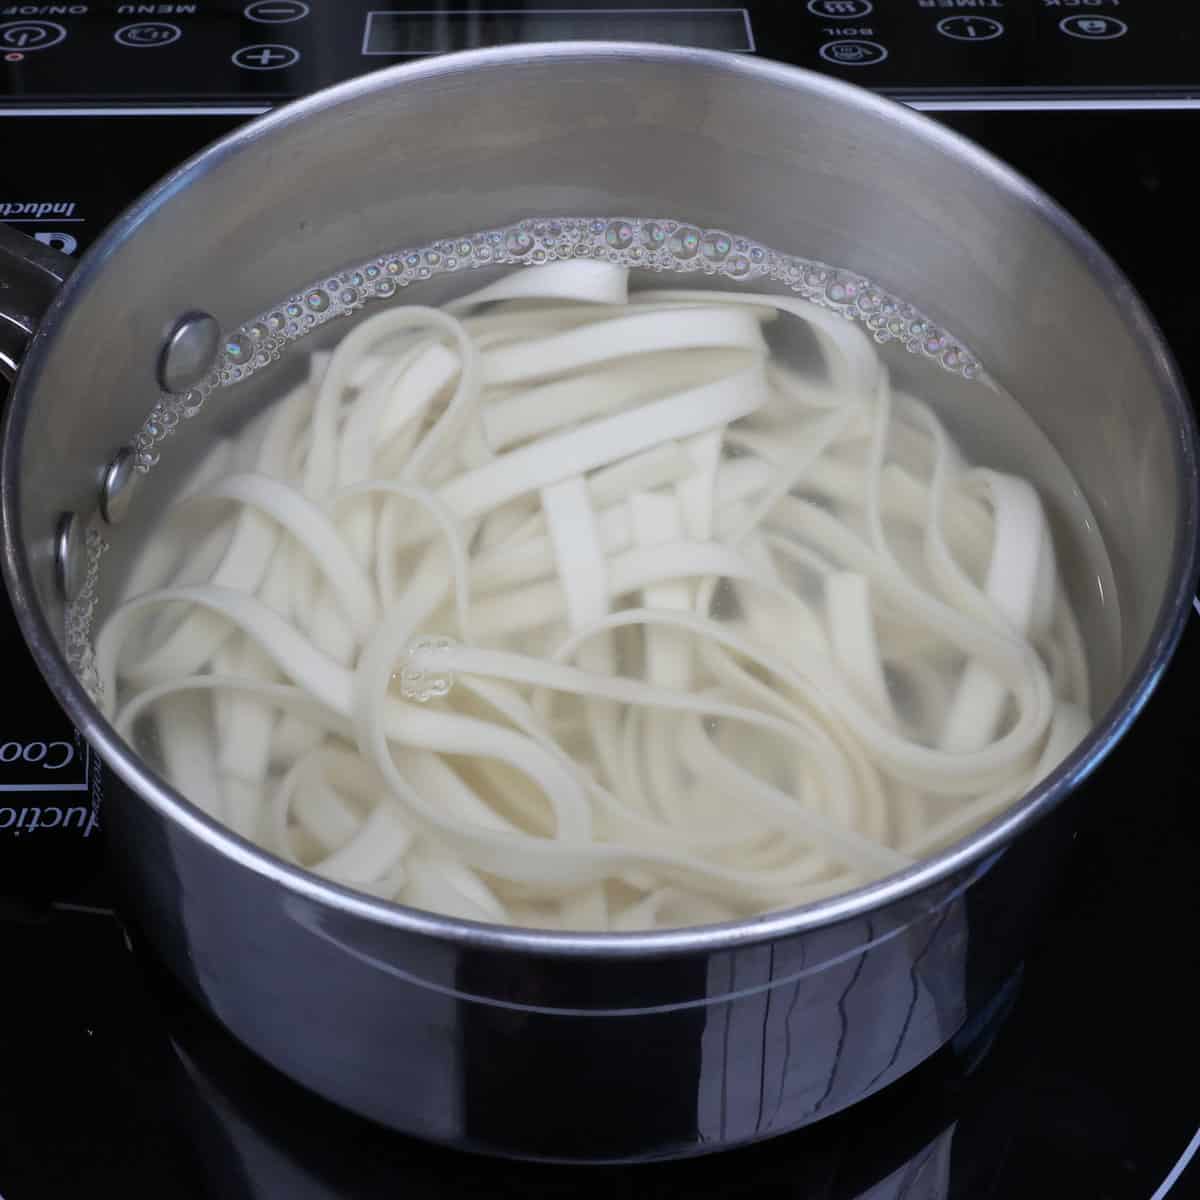 lo mein noodles cooking in a pot.